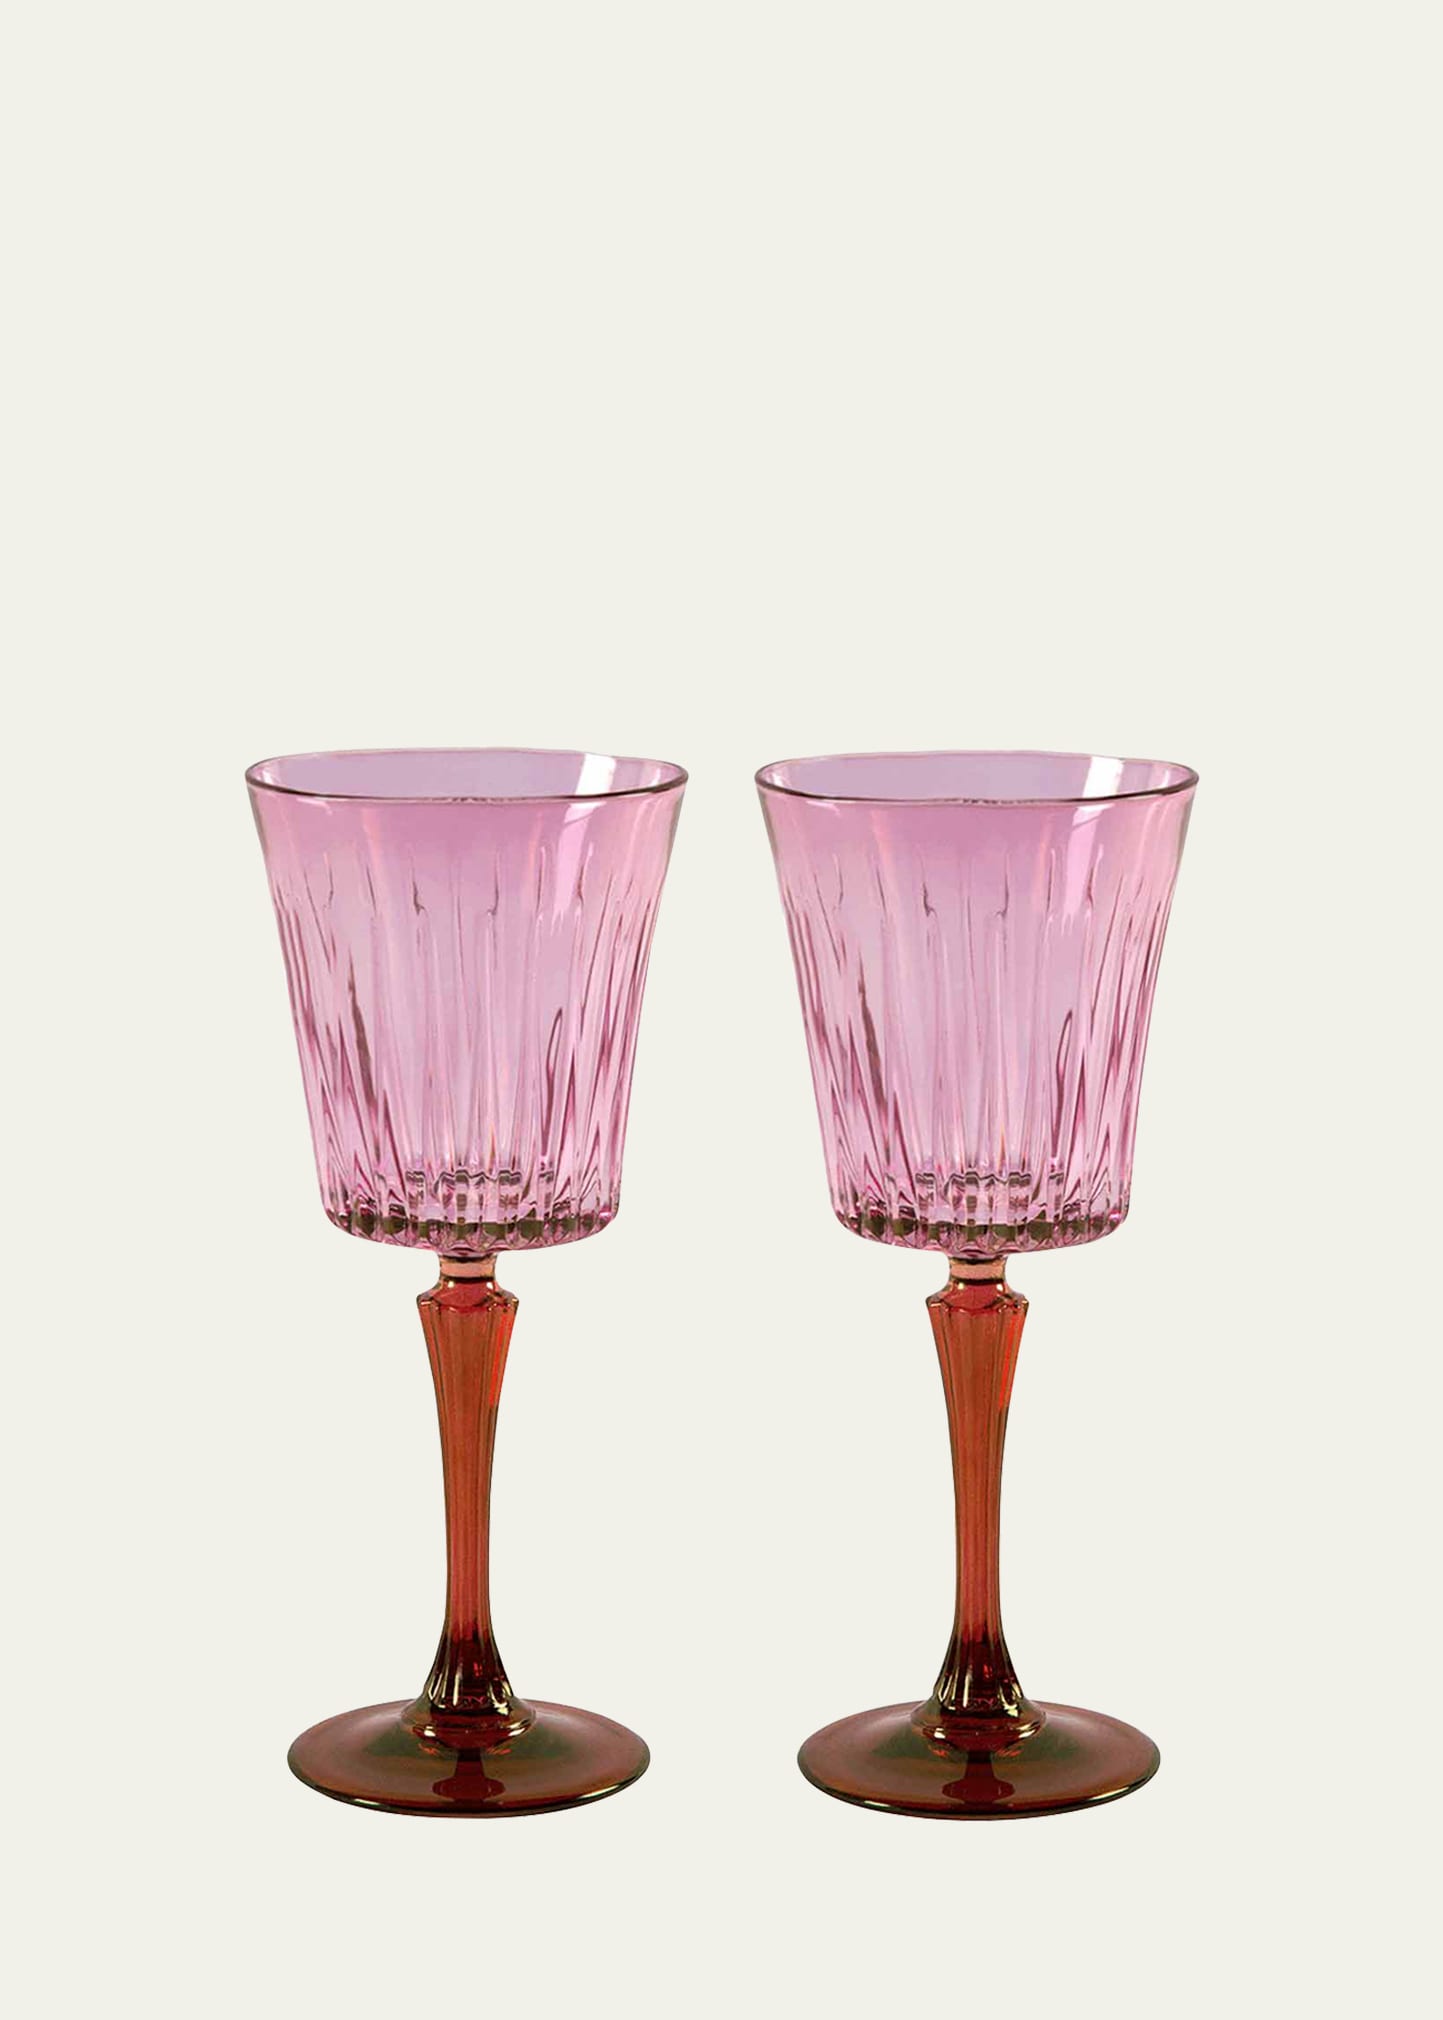 Luisa Beccaria Pink Shaded Stemmed Water Glasses, Set of 2